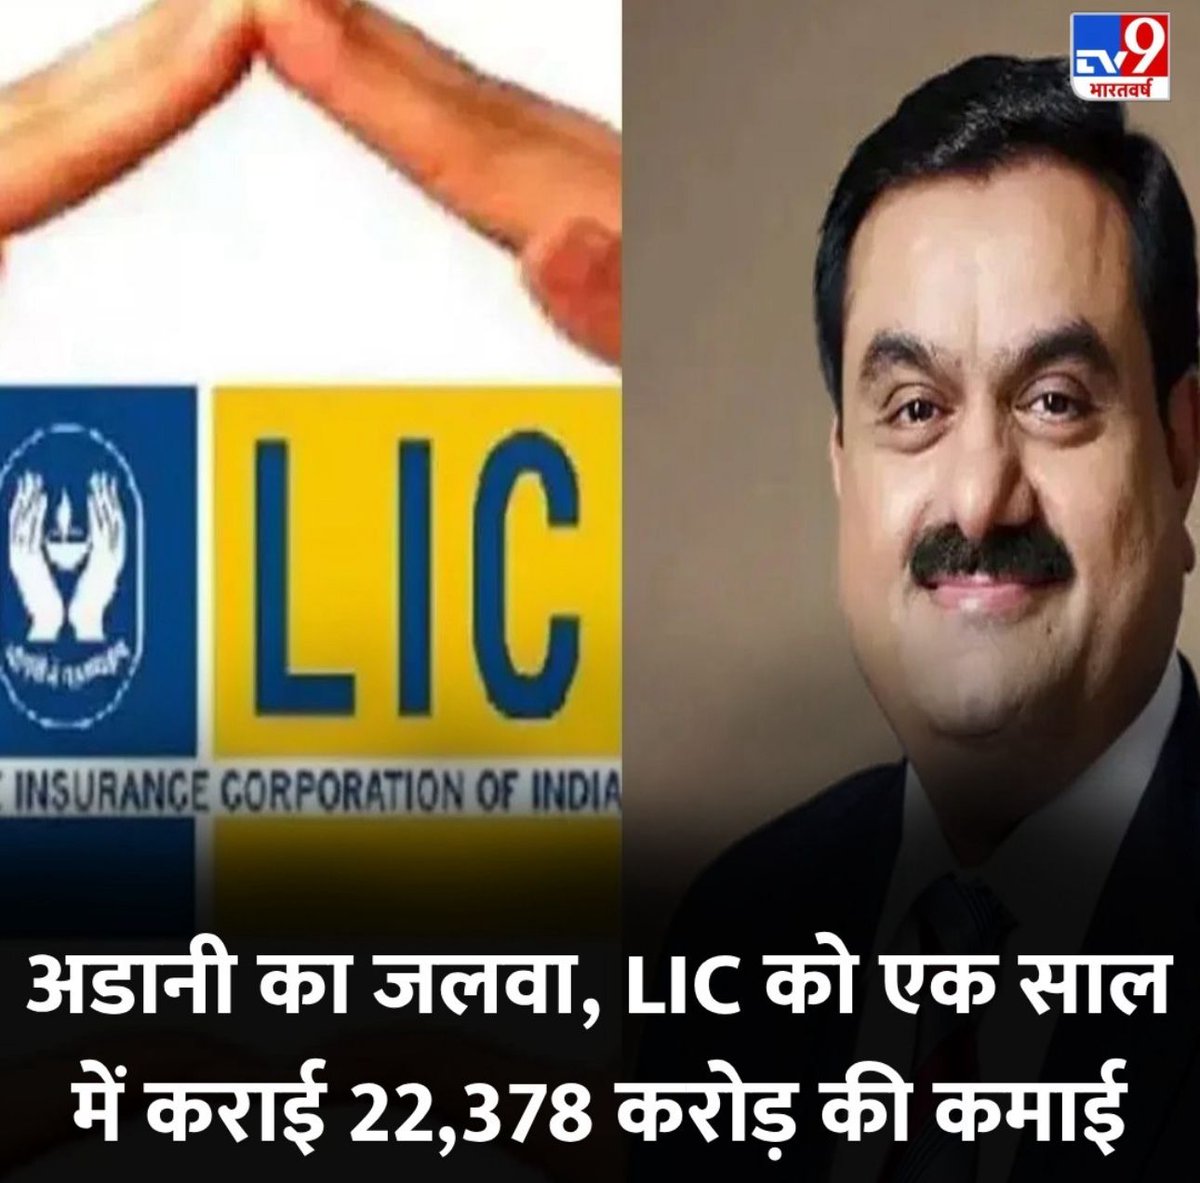 LIC Sees 59% Jump In Value Of Investments In Adani Stocks. LIC had trusted Adani during Hindenburg report. LIC's investment in Adani Green Energy Ltd saw the biggest rise in one year.